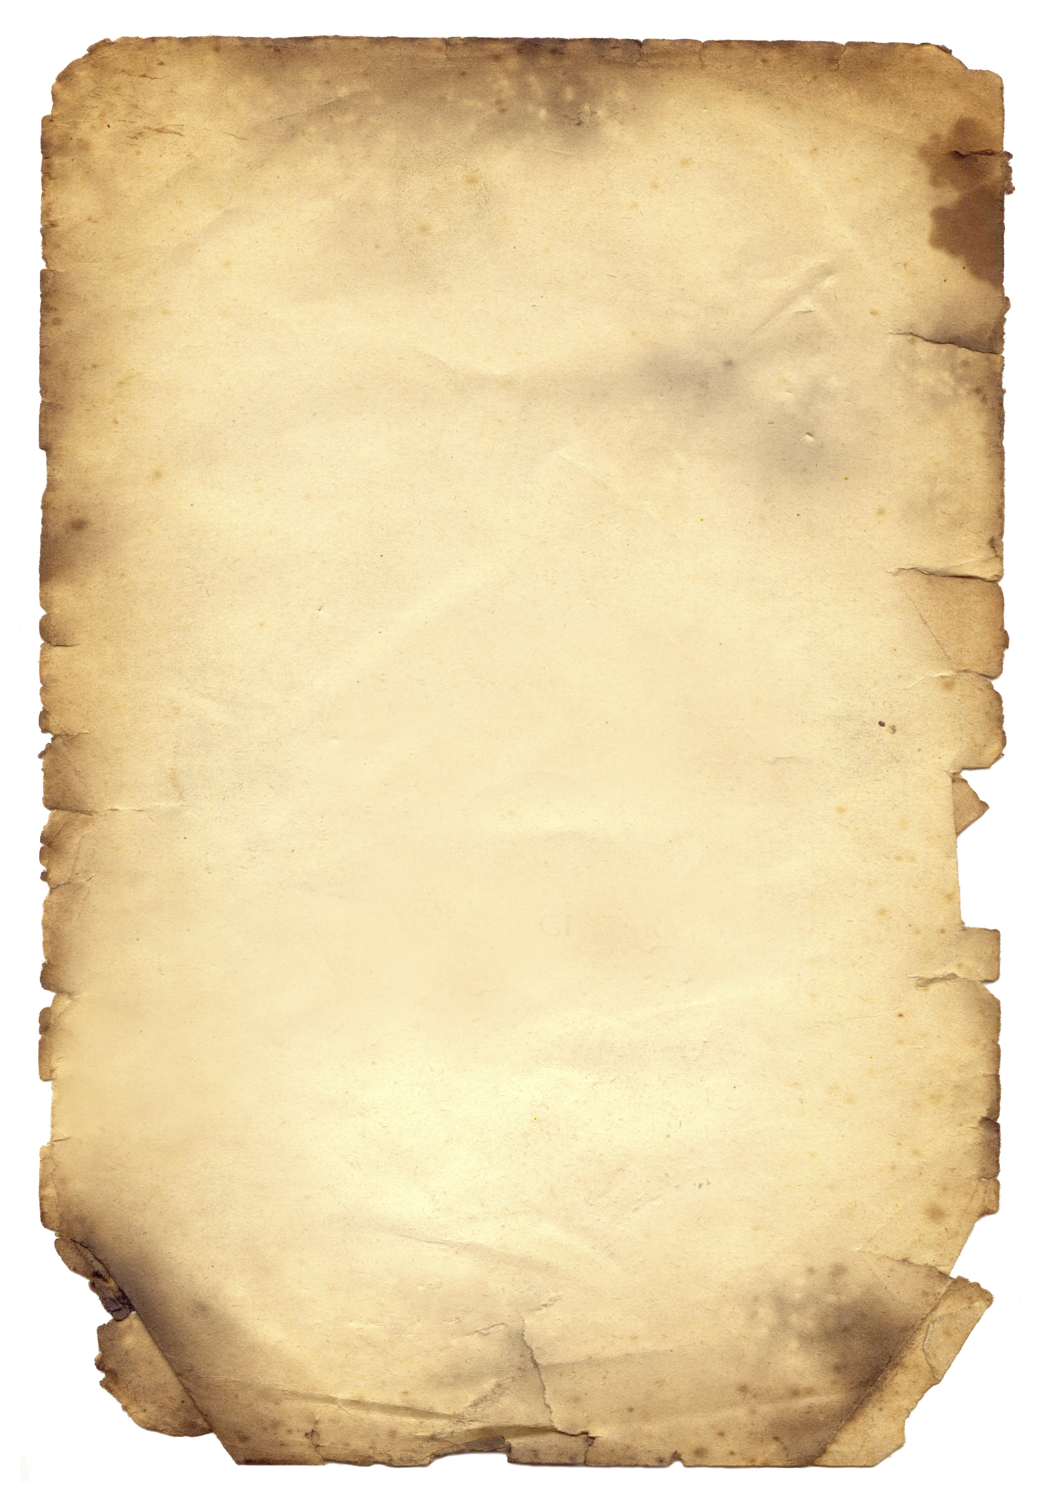 http://www.newdesignfile.com/postpic/2012/12/old-parchment-paper-template_123607.png